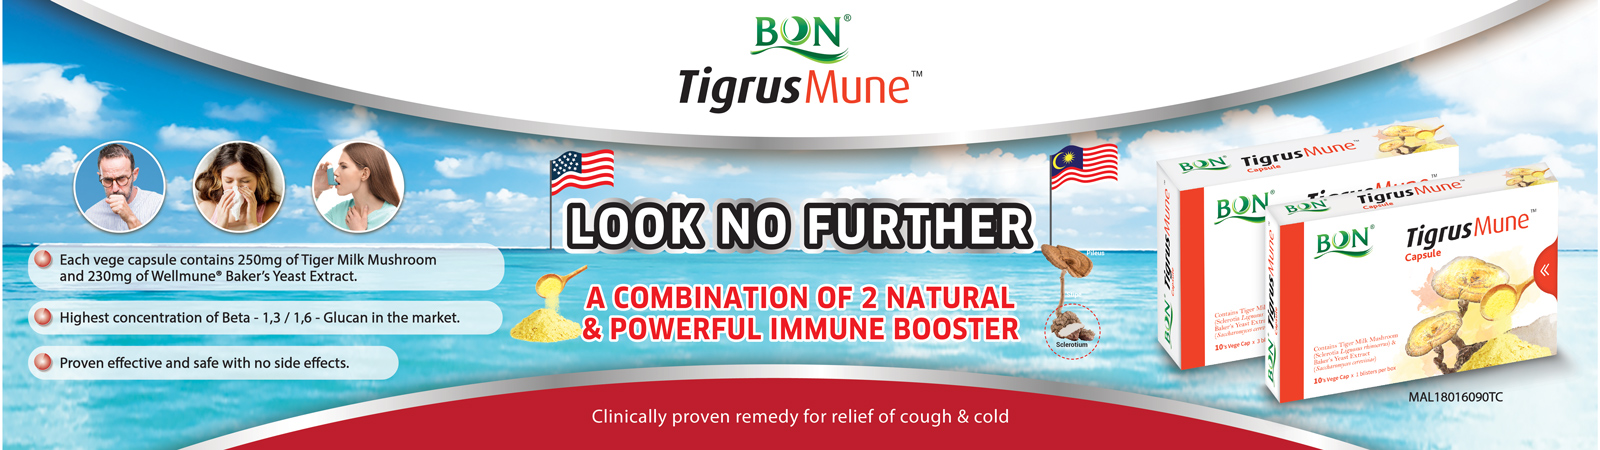 Strengthen Your Lungs Naturally with BON TigrusMune